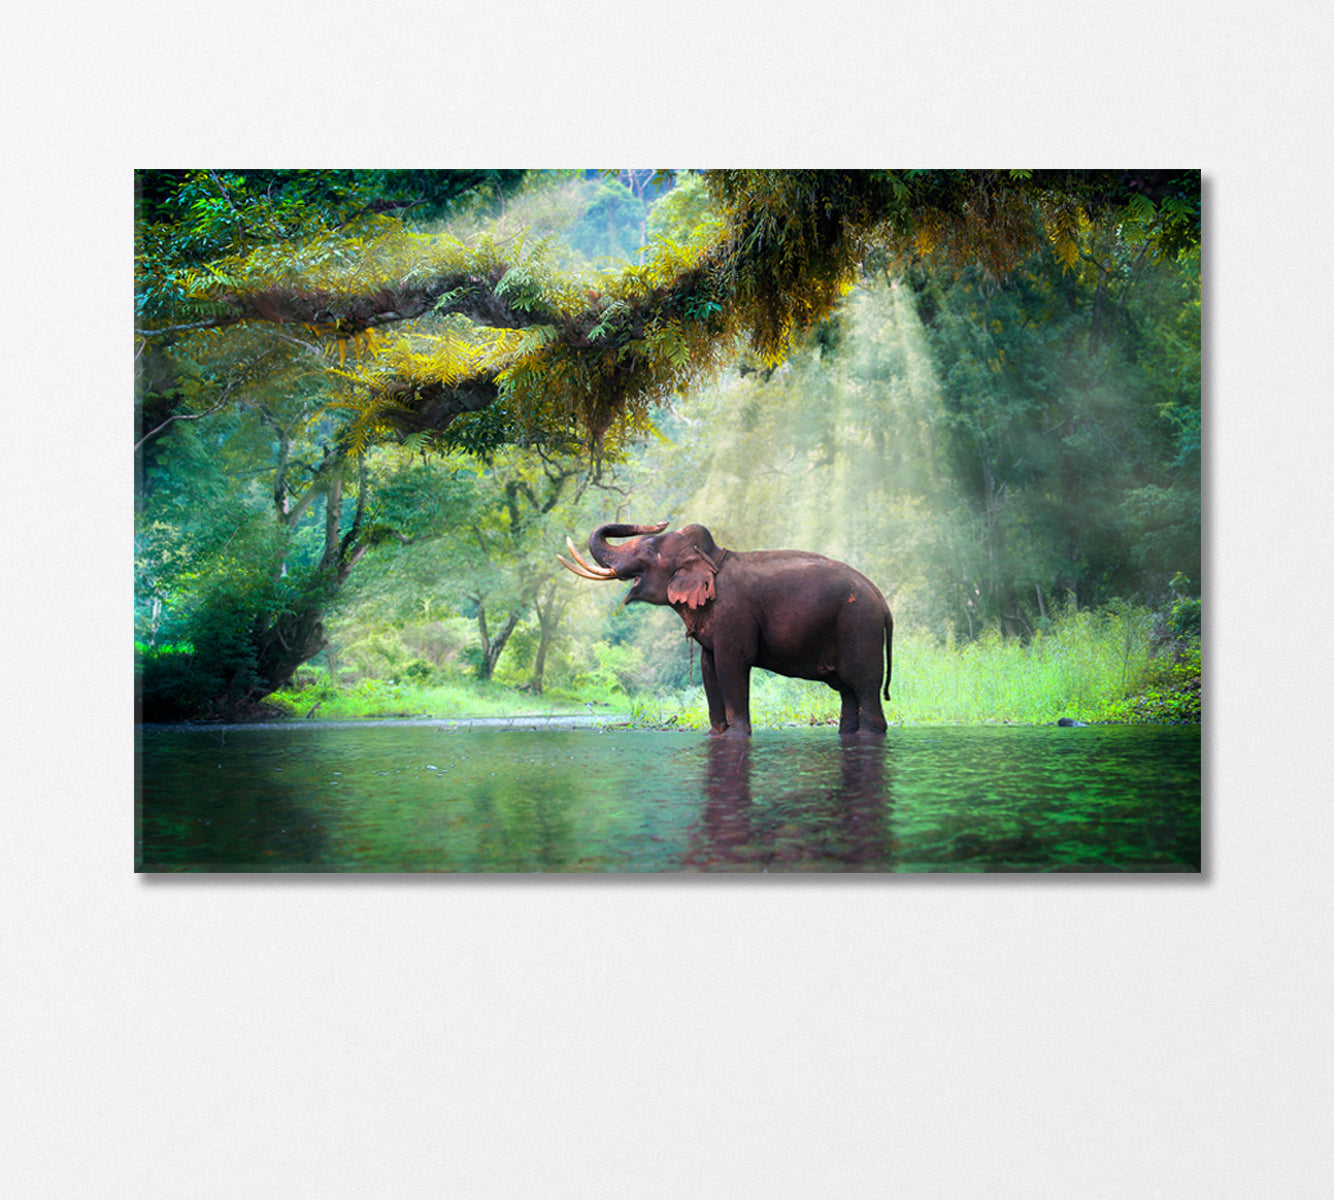 Wild Elephant in the Fairy Forest Thailand Canvas Print-Canvas Print-CetArt-1 Panel-24x16 inches-CetArt